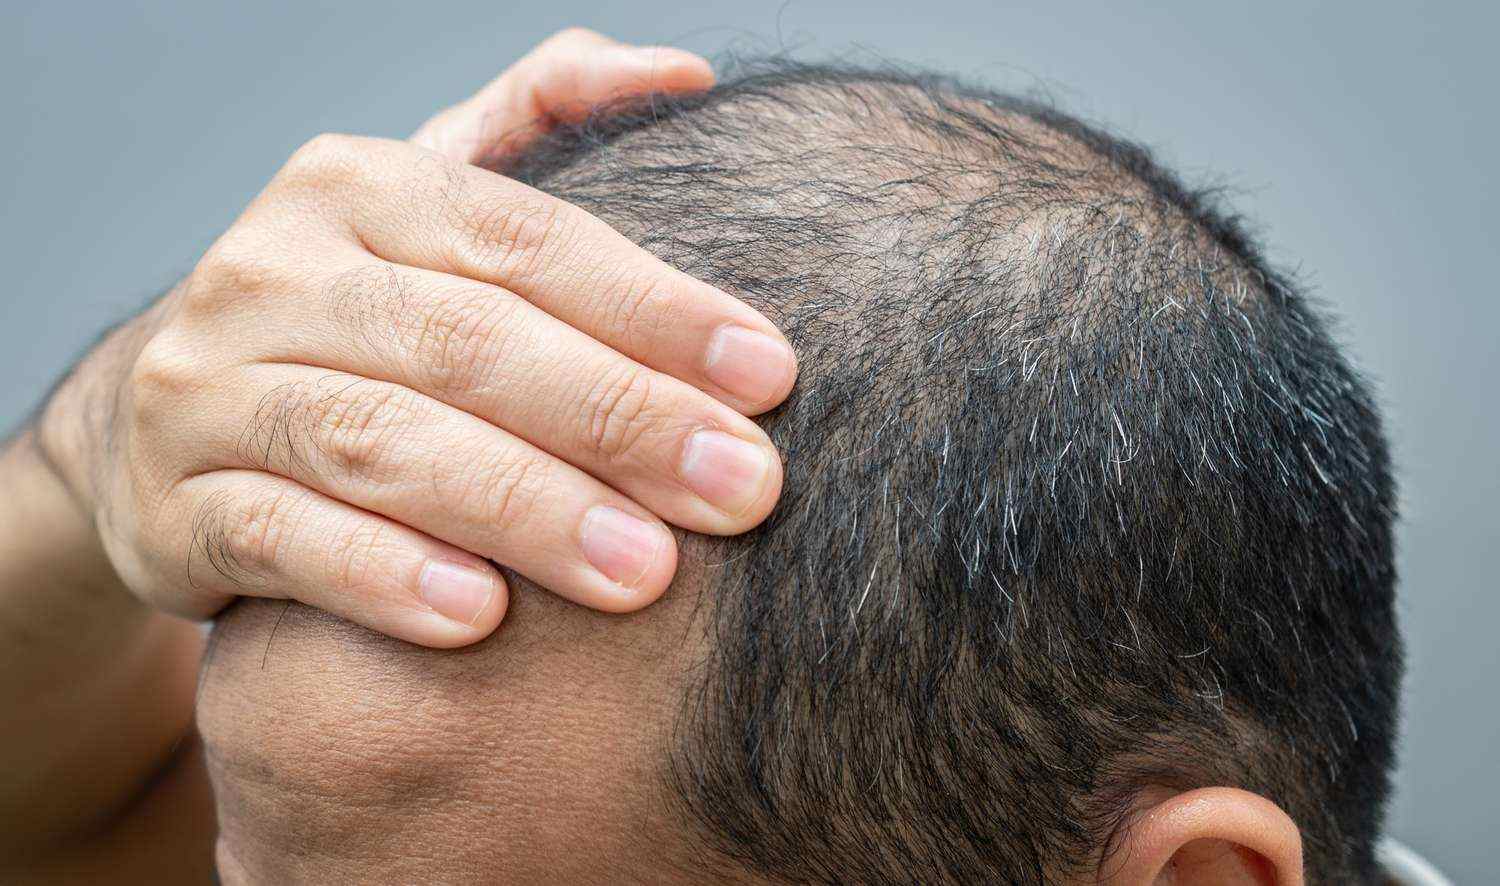 Can hair care be taken if the signs of baldness are known?